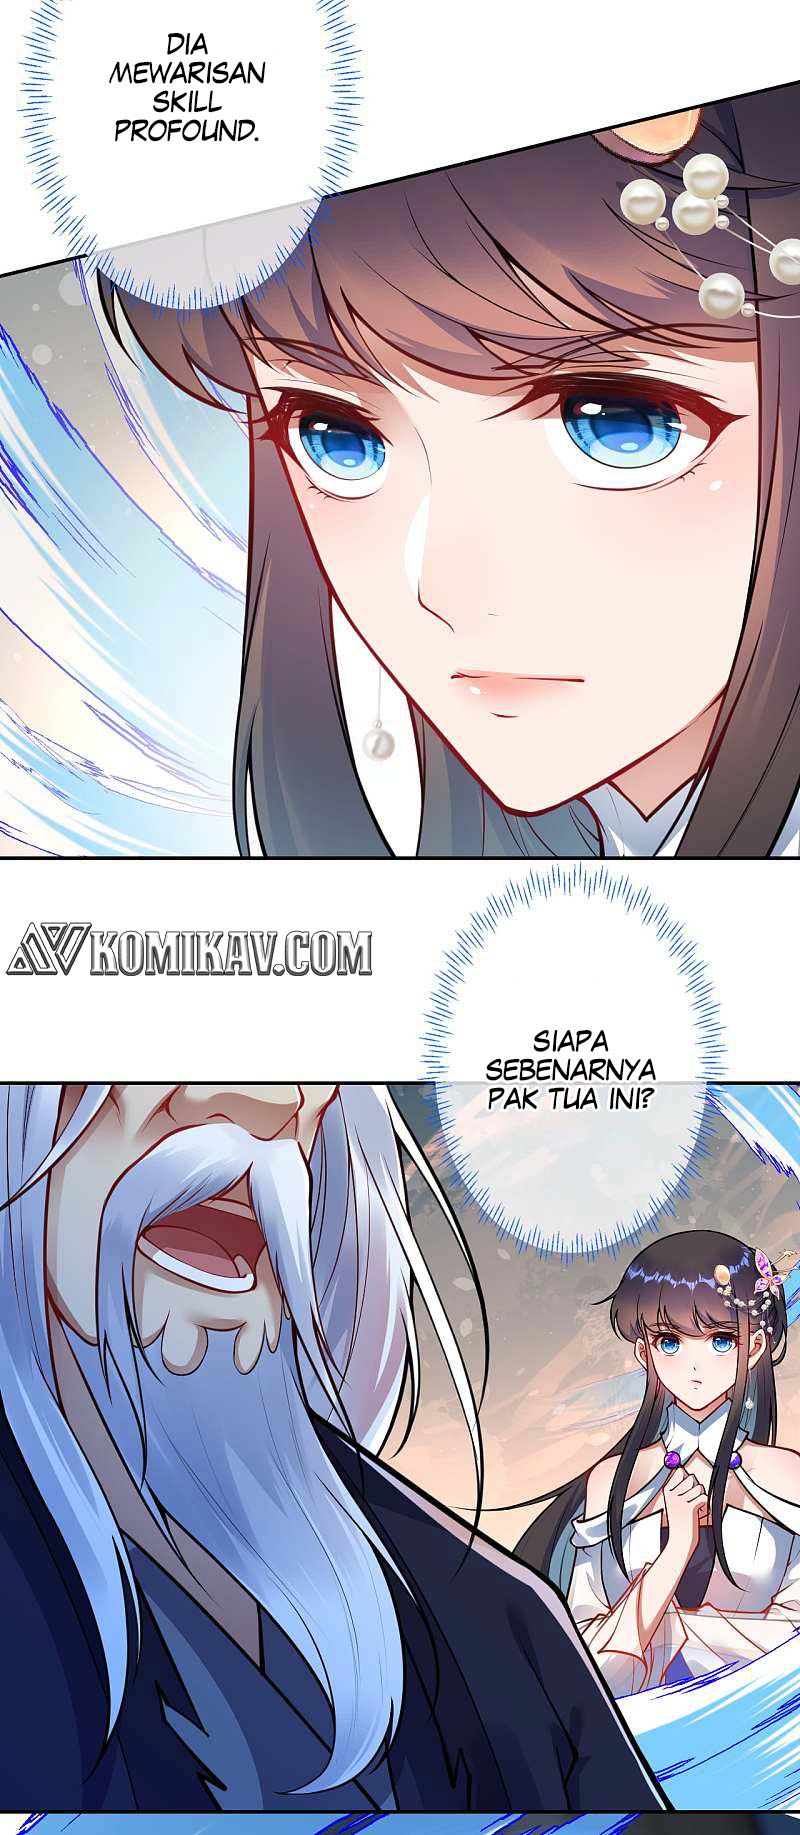 Invincible Sword Domain Chapter 49